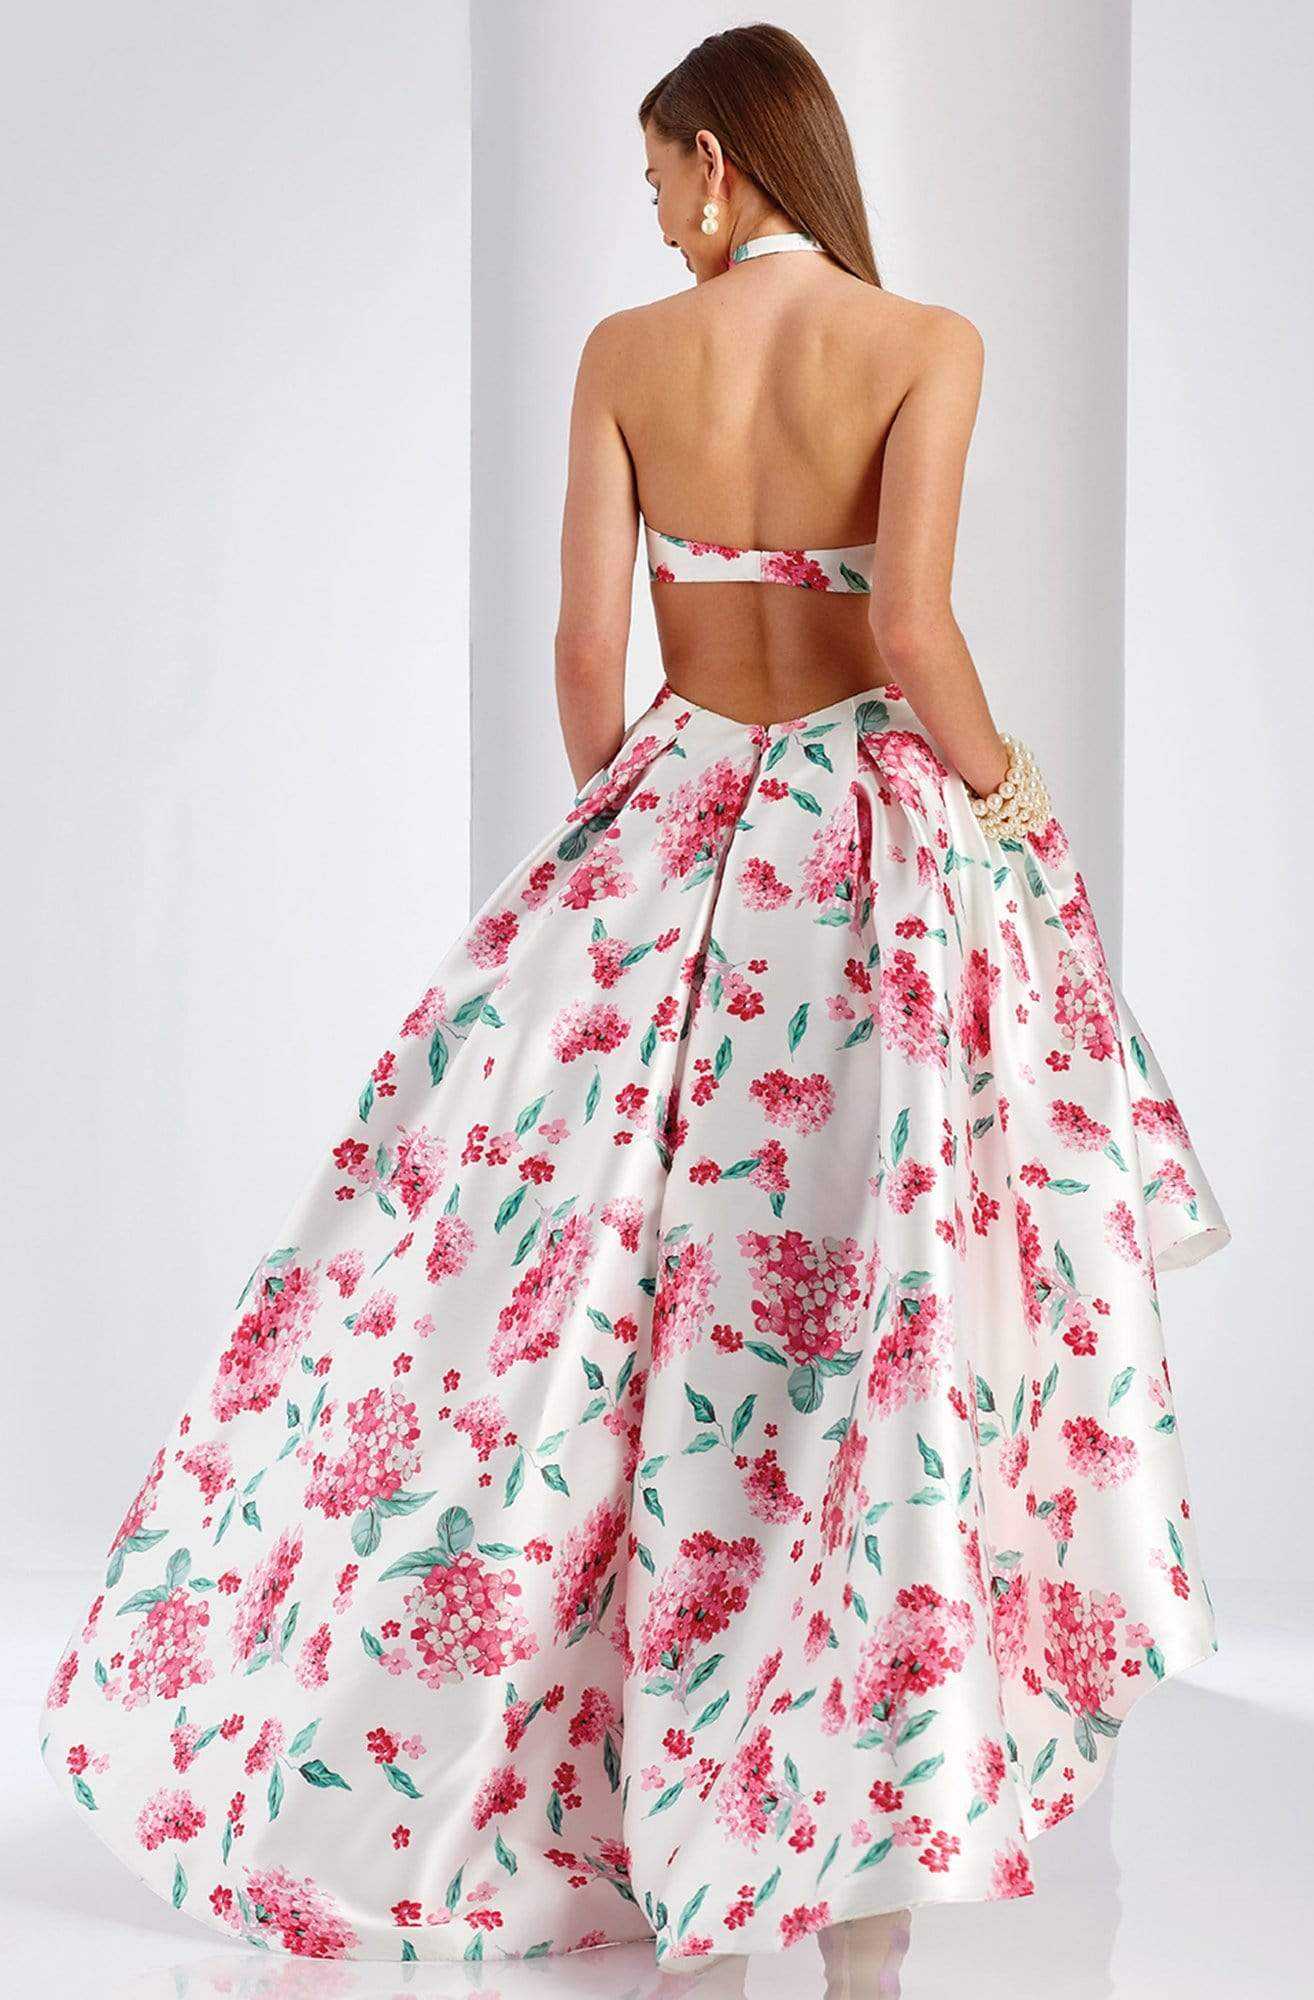 Clarisse, Clarisse Prom - 3563 Strapless Floral High Low Prom Dress